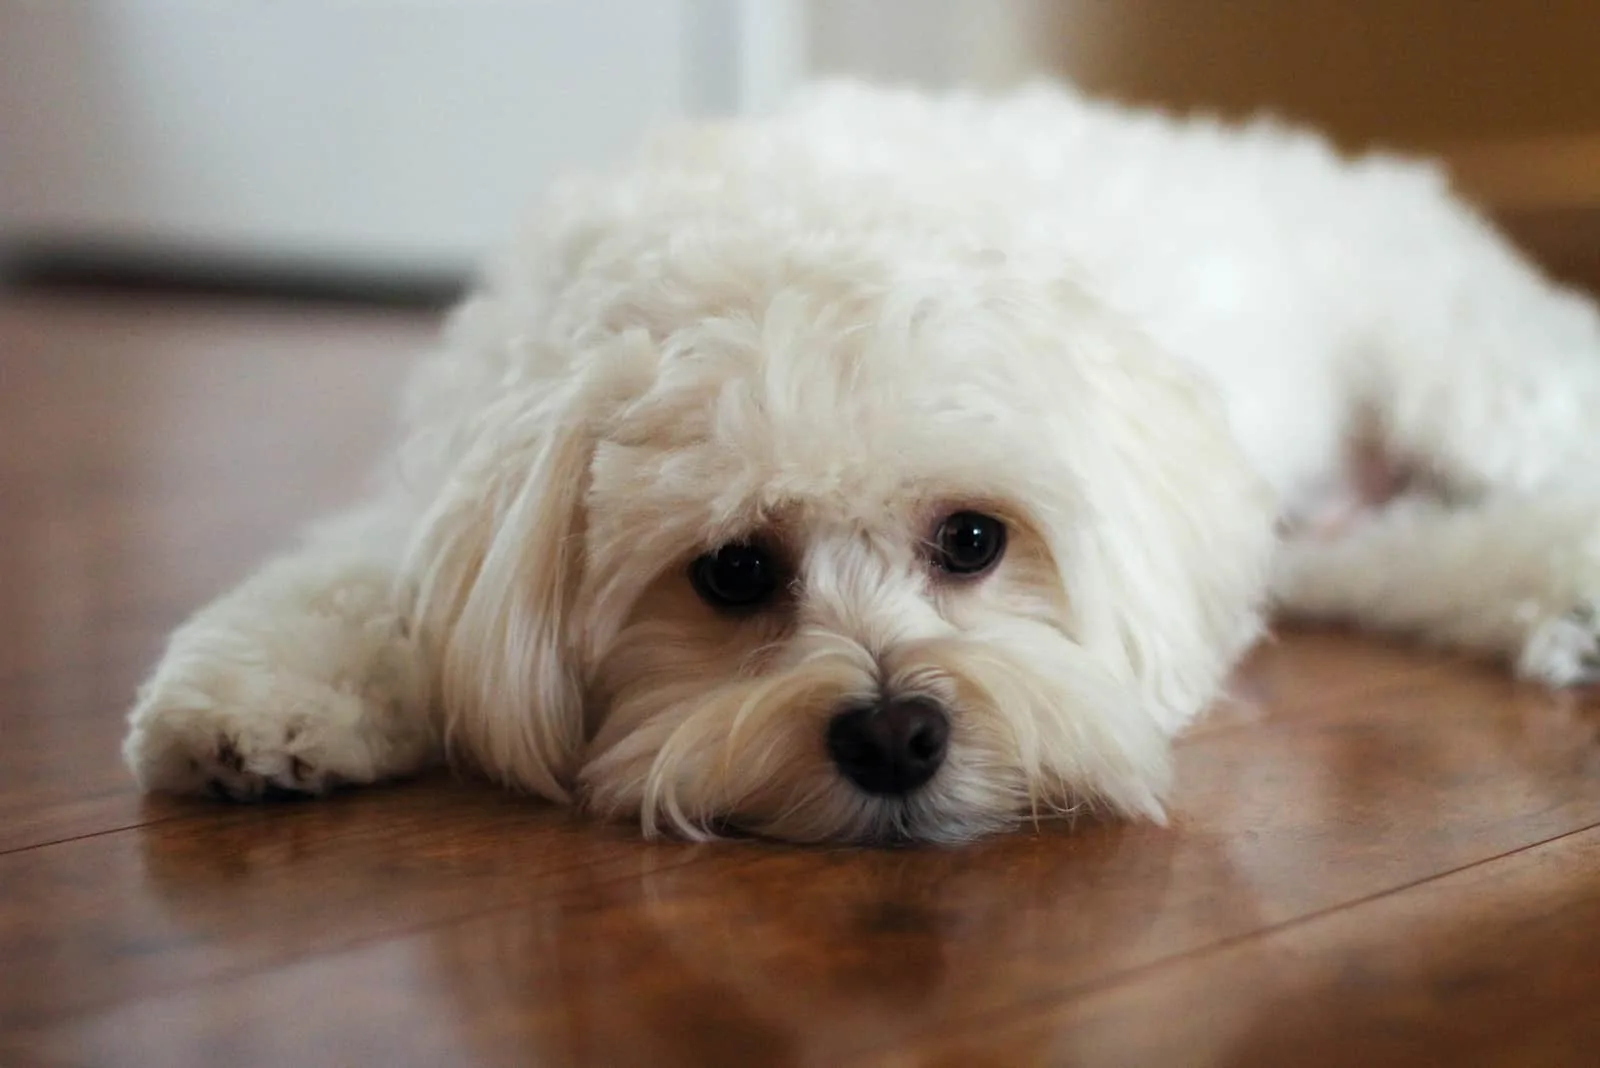 A Havanese Maltese puppy stares at the camera